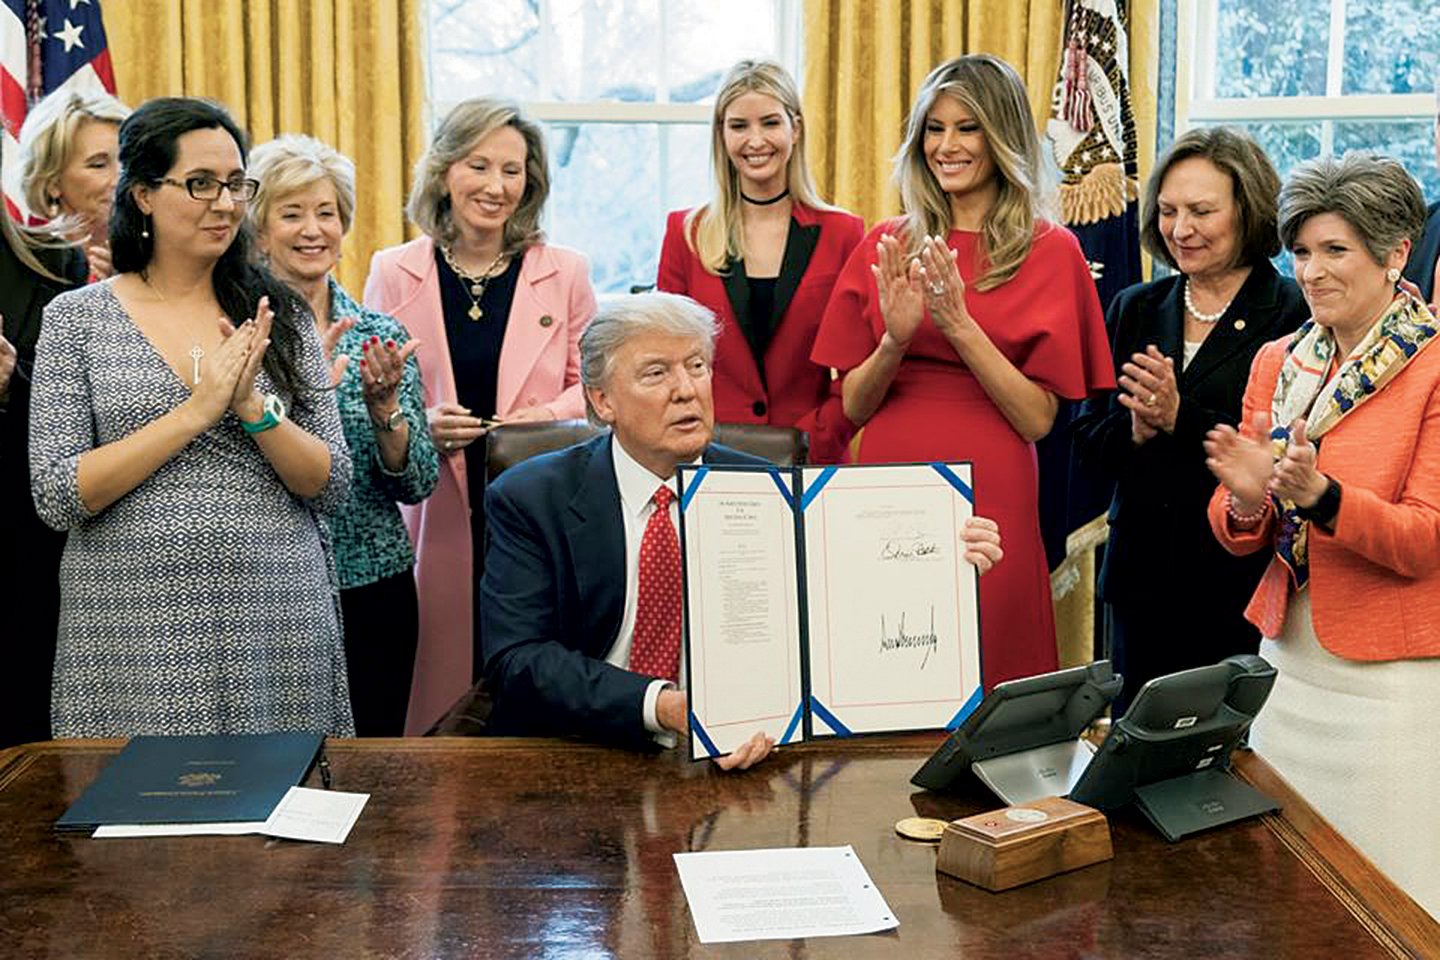 By 2017, Comstock avoided President Trump’s own conspiracy theories, instead appearing with him at less polarizing events, such as the signing of the INSPIRE Women Act. Photograph by Shealah Craighead.